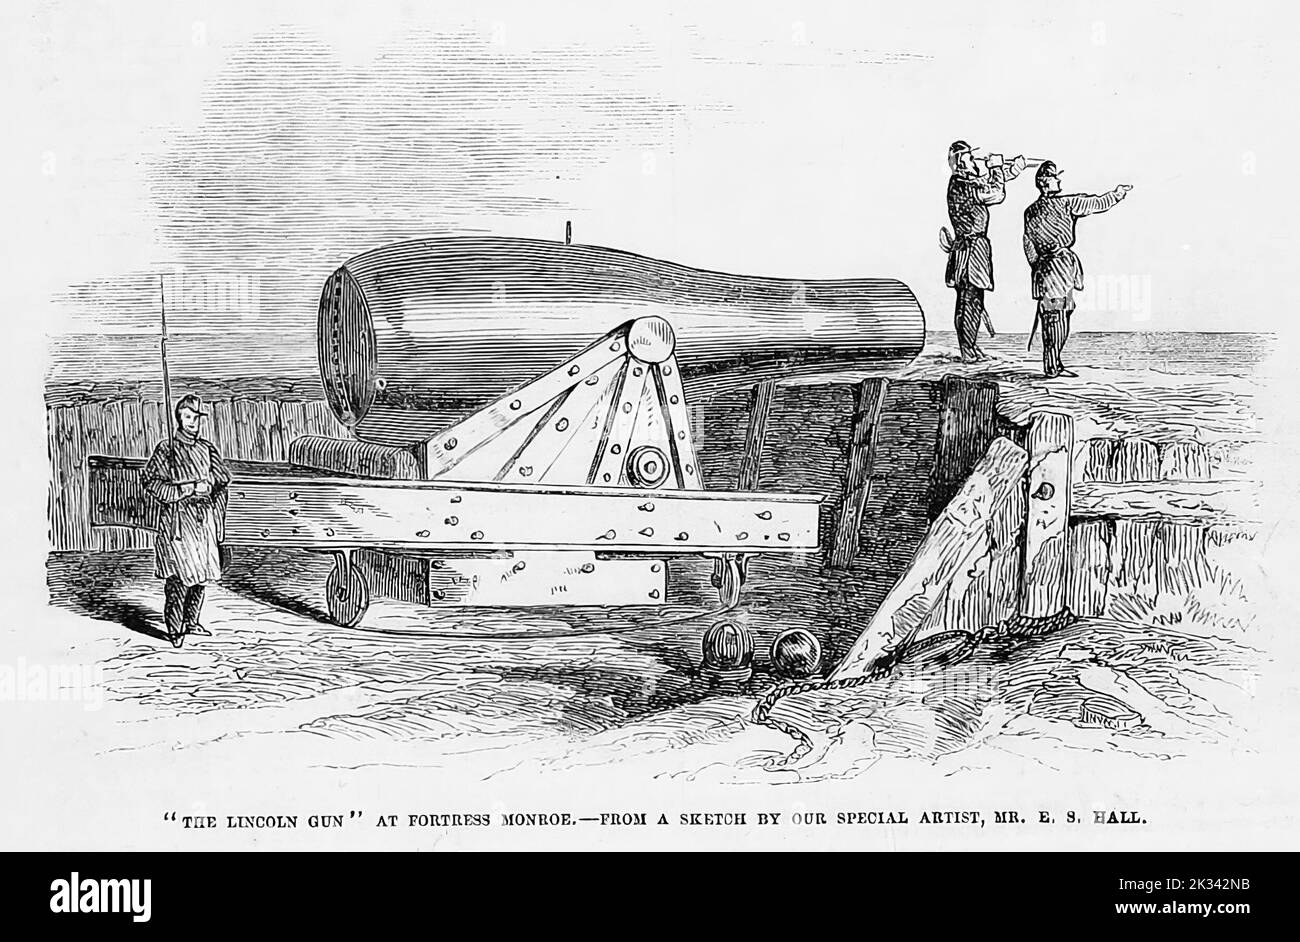 'The Lincoln Gun' at Fort Monroe, Virginia. 1862. 19th century American Civil War illustration from Frank Leslie's Illustrated Newspaper Stock Photo